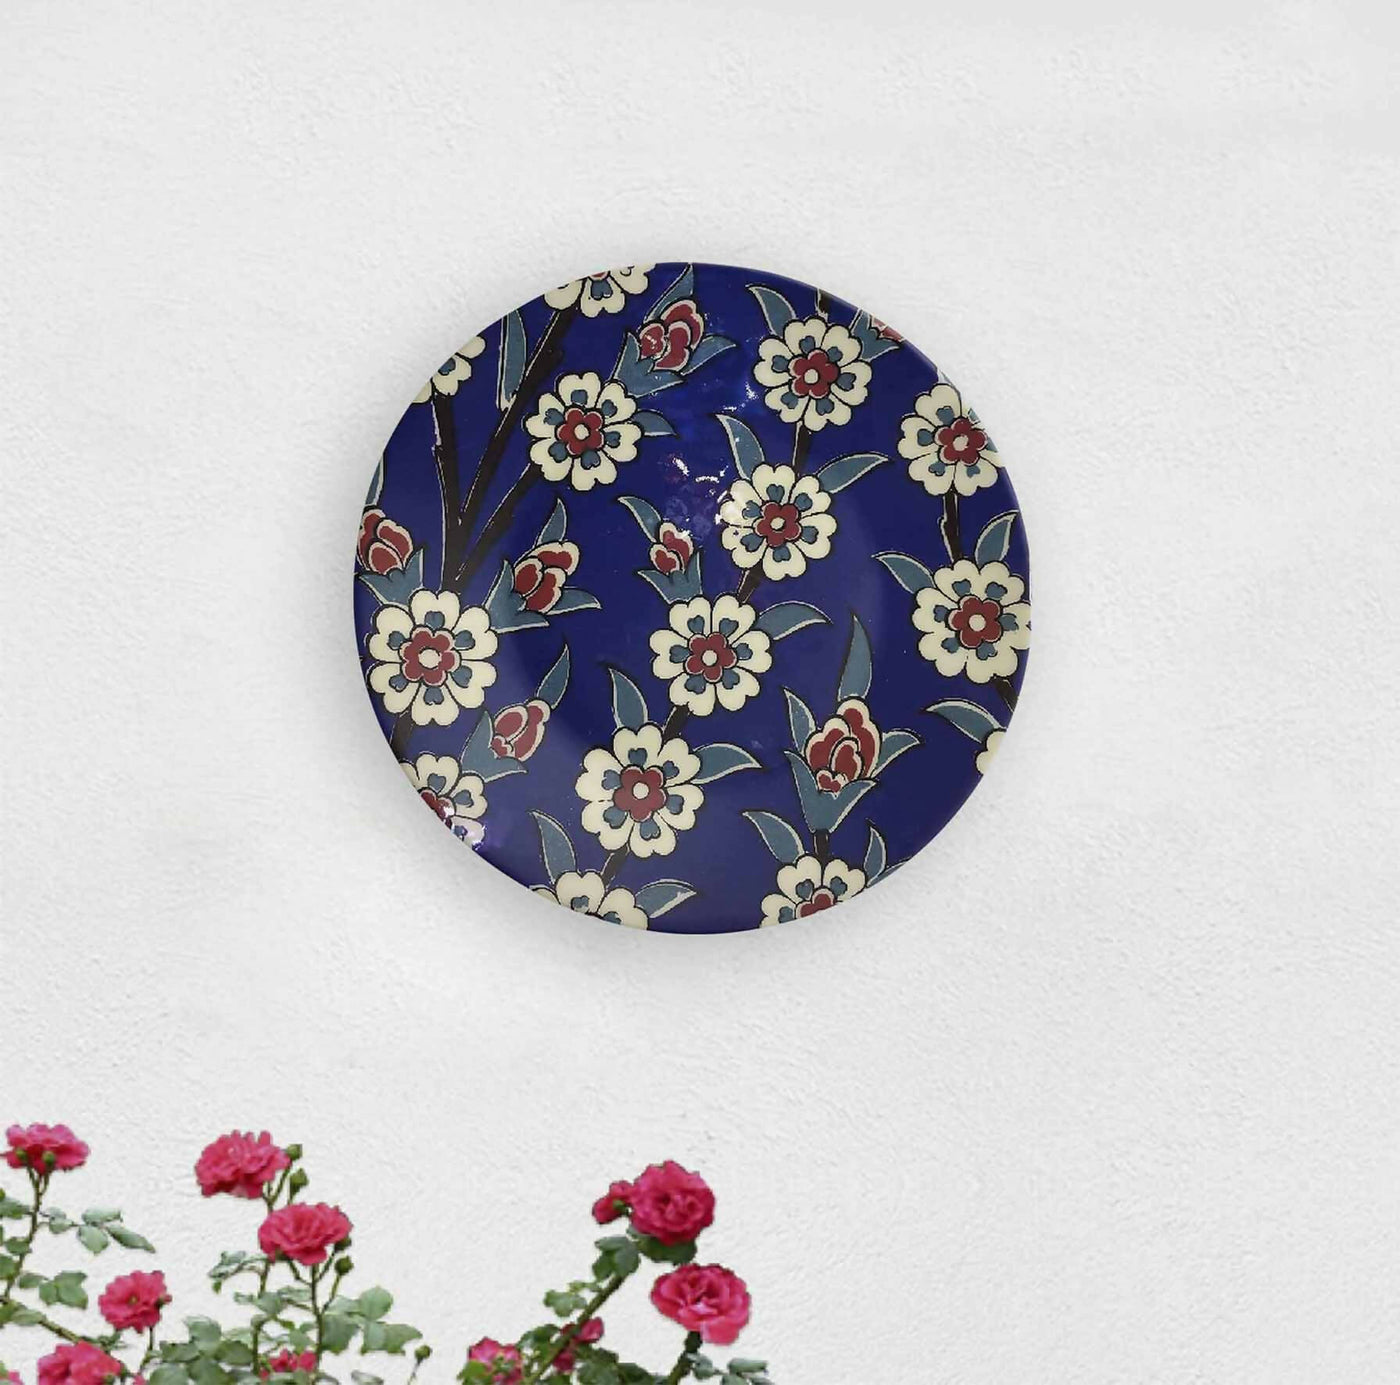 Blue Cobalt Pottery Floral Decorative Wall Plate - Wall Decor - 1